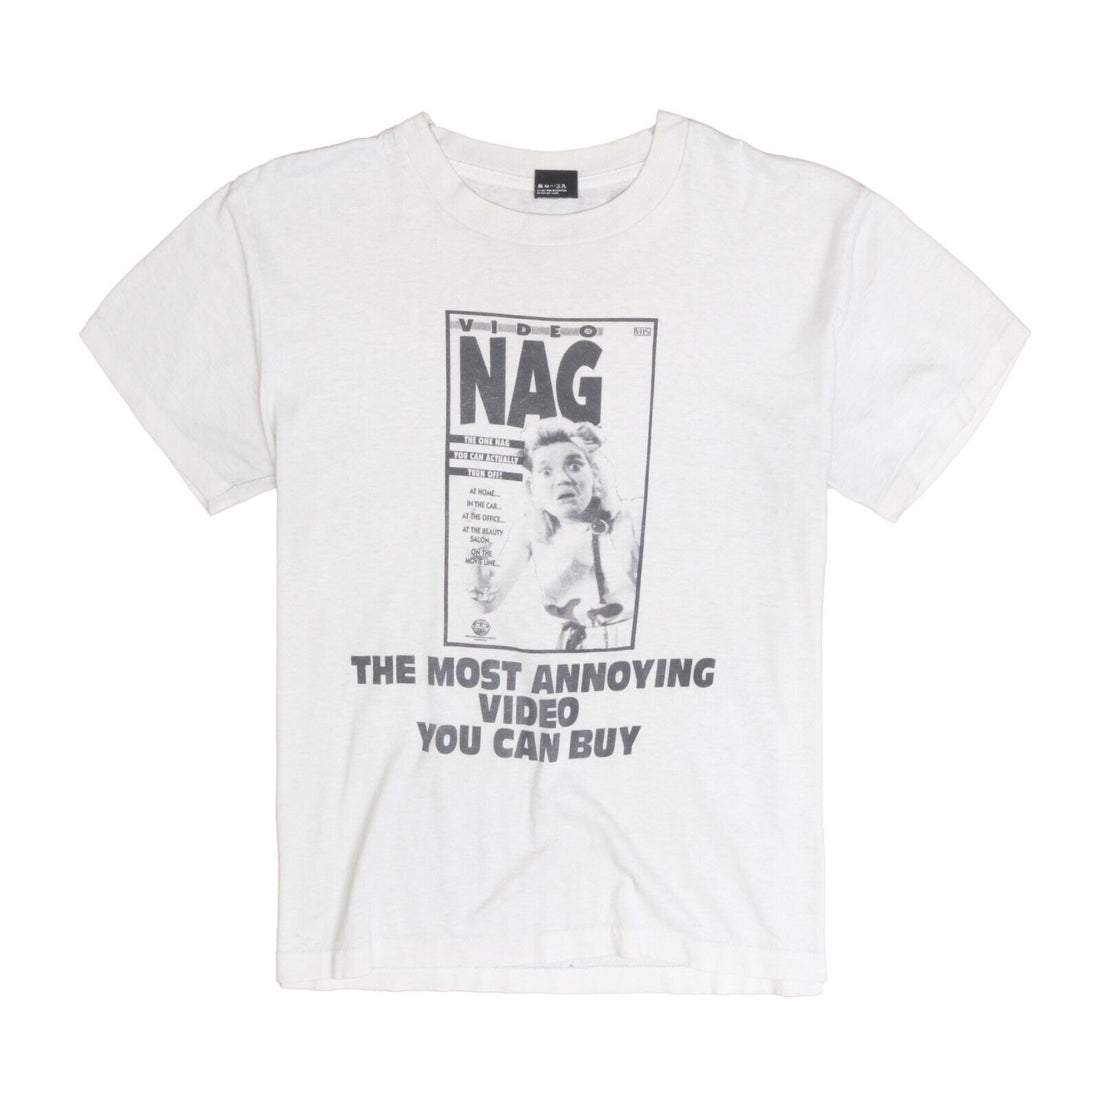 Vintage Video NAG The Most Annoying Video You Can Buy T-Shirt Size XL Parody